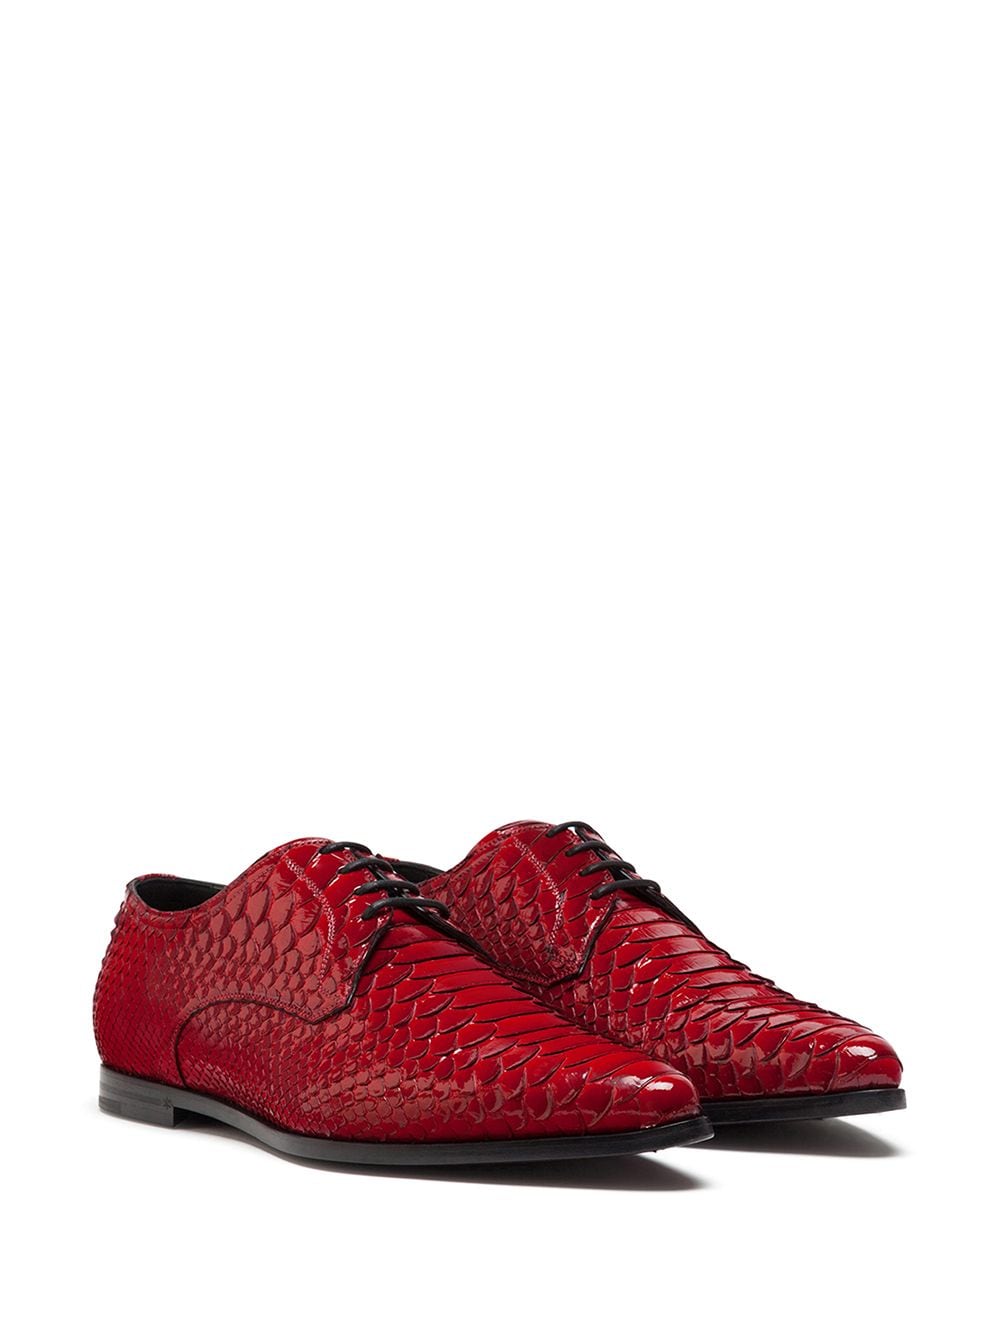 Shop Dolce & Gabbana Textured Varnished Derby Shoes In Red